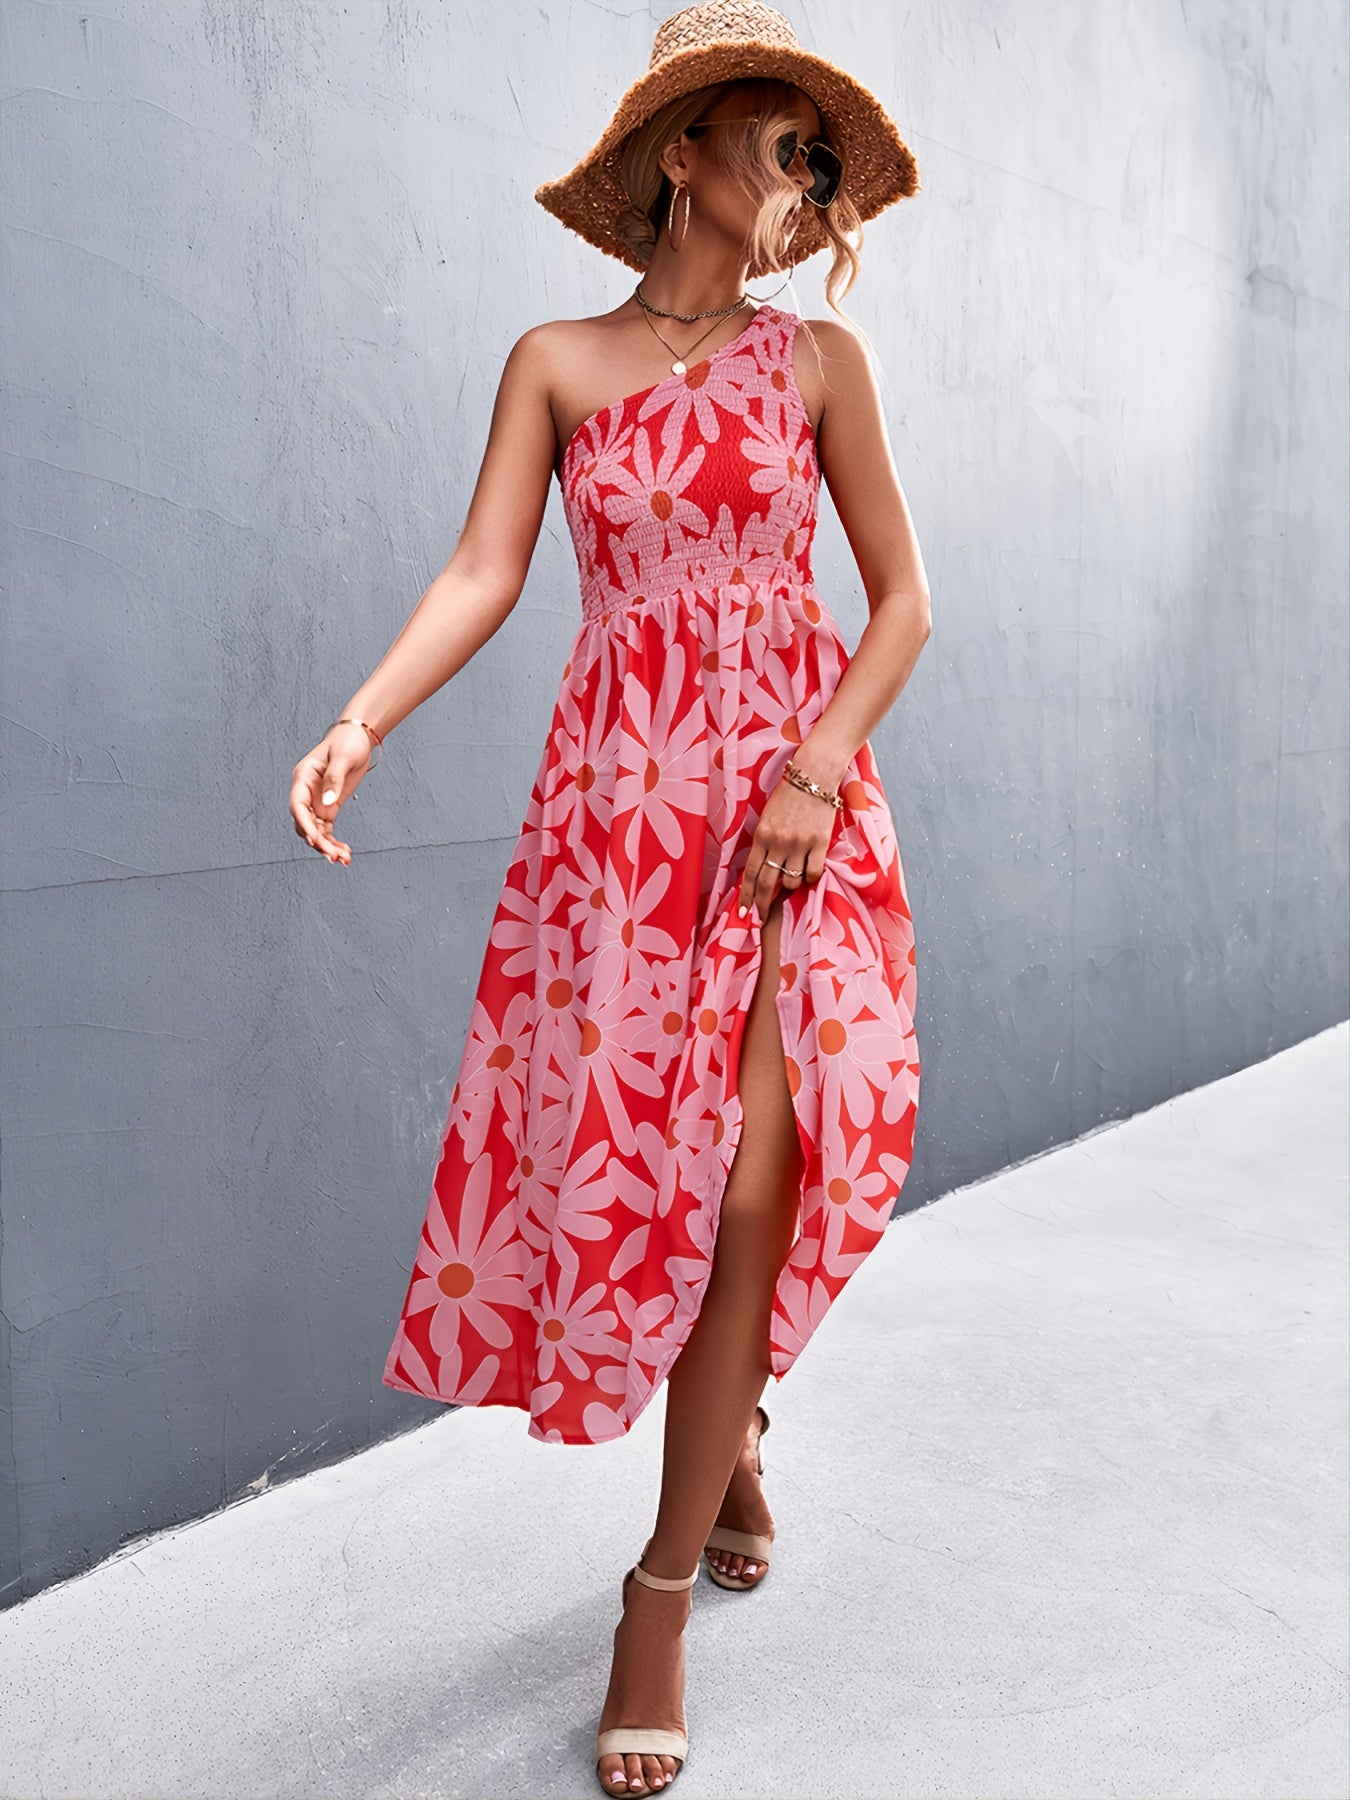 Women's Dresses One Shoulder Sleeveless Casual Summer Vacation Dresses Smocked High Waist Floral Pri AE1011